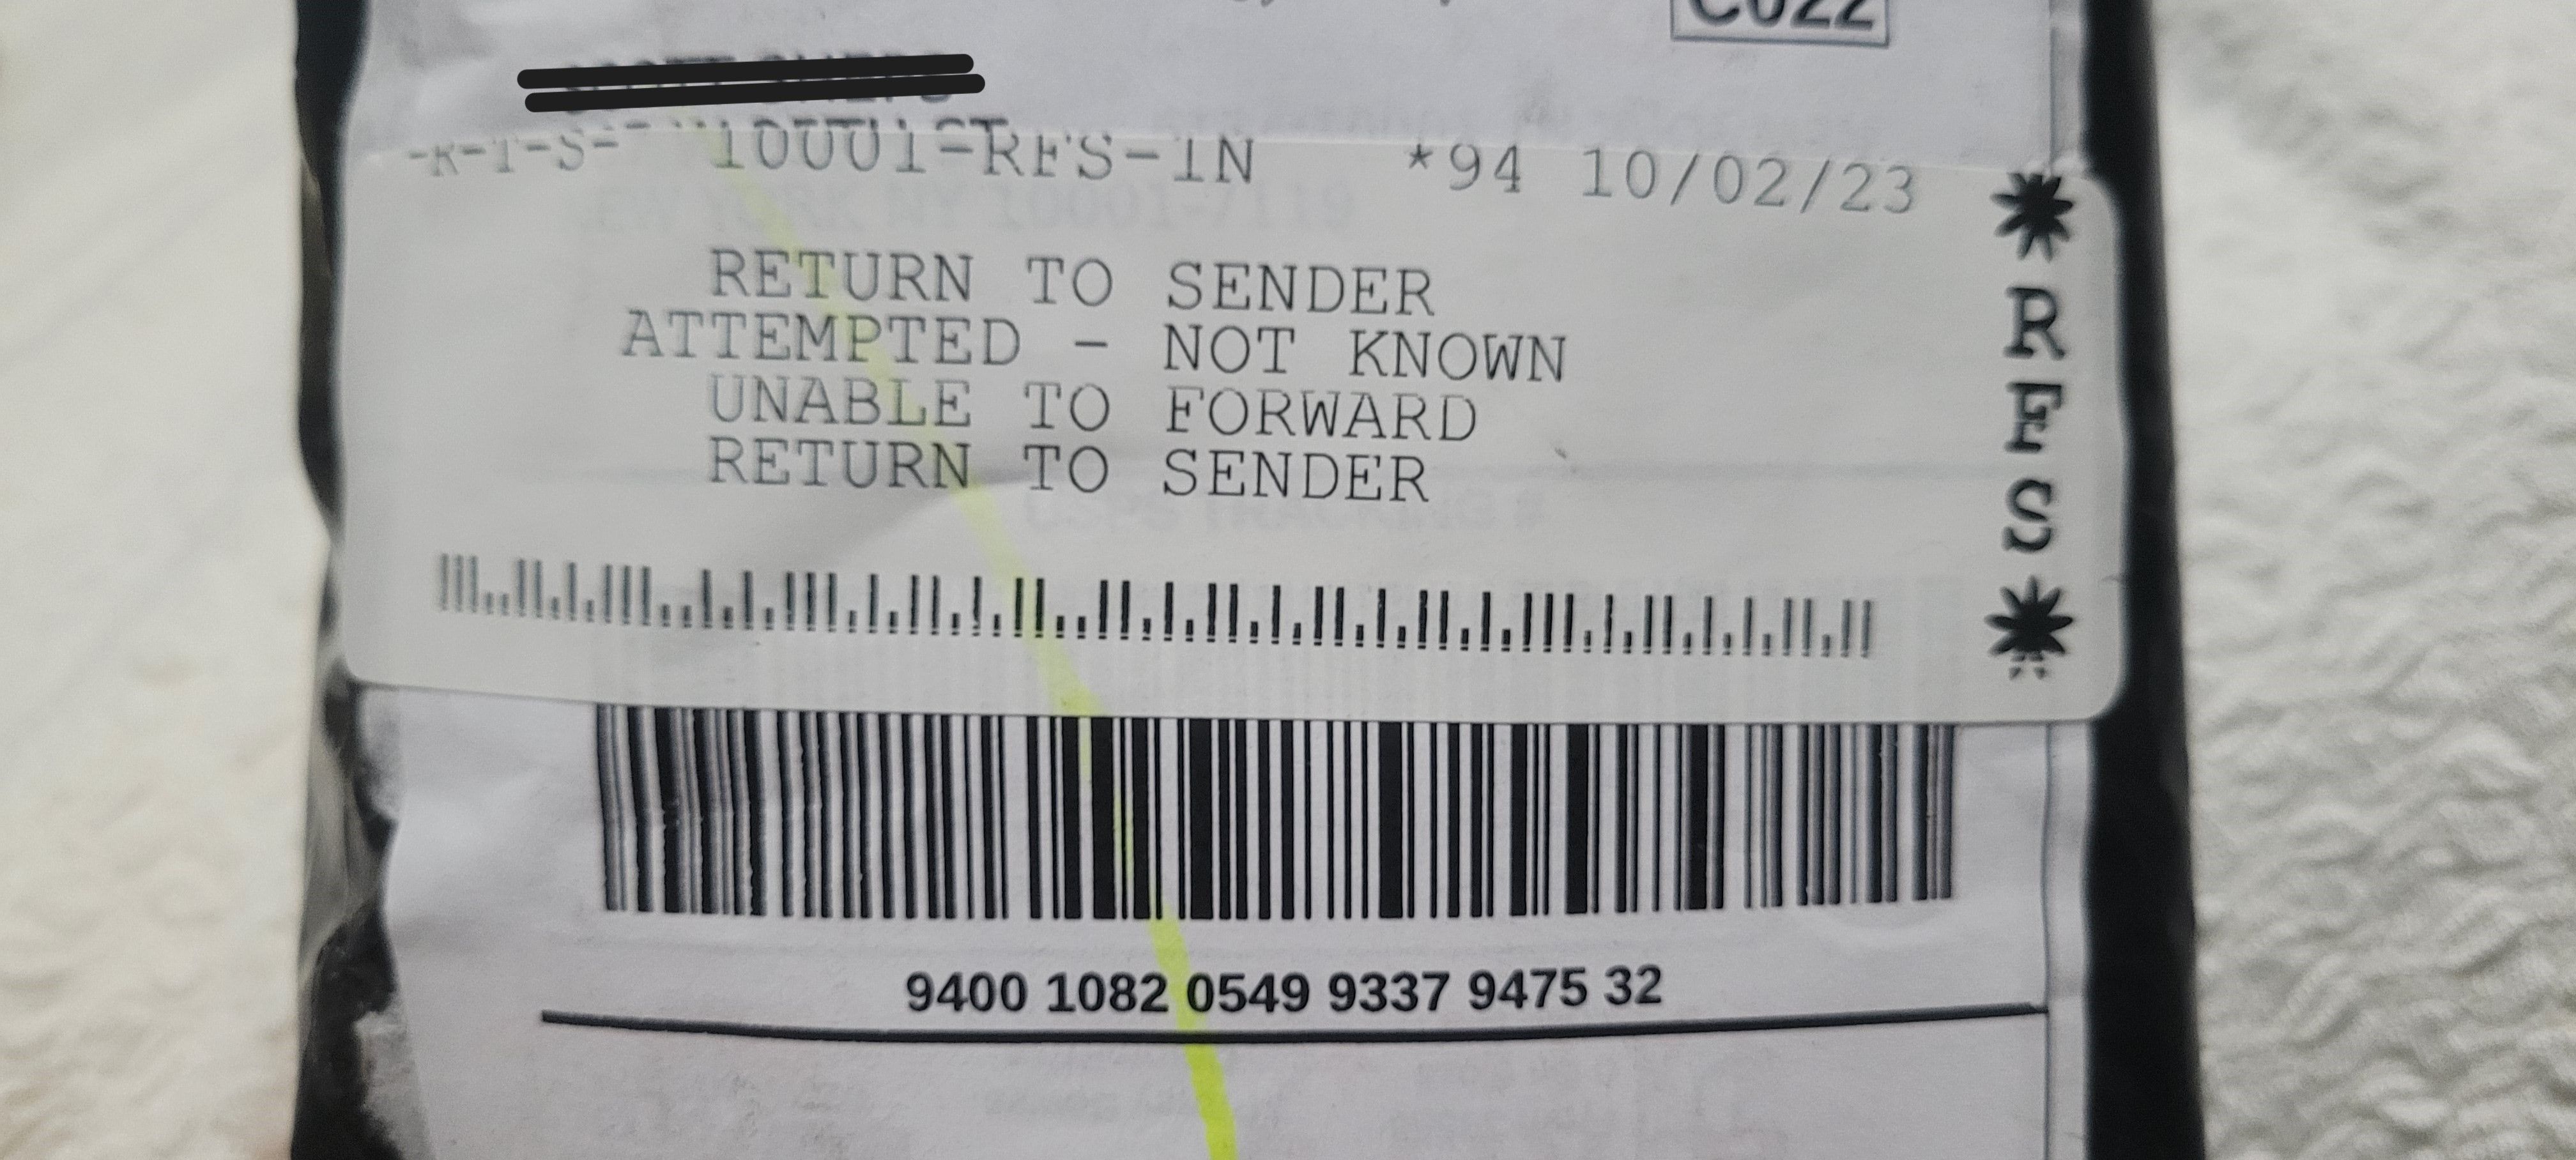 Solved: Help! I had a package returned to me as A.N.K. - The eBay 